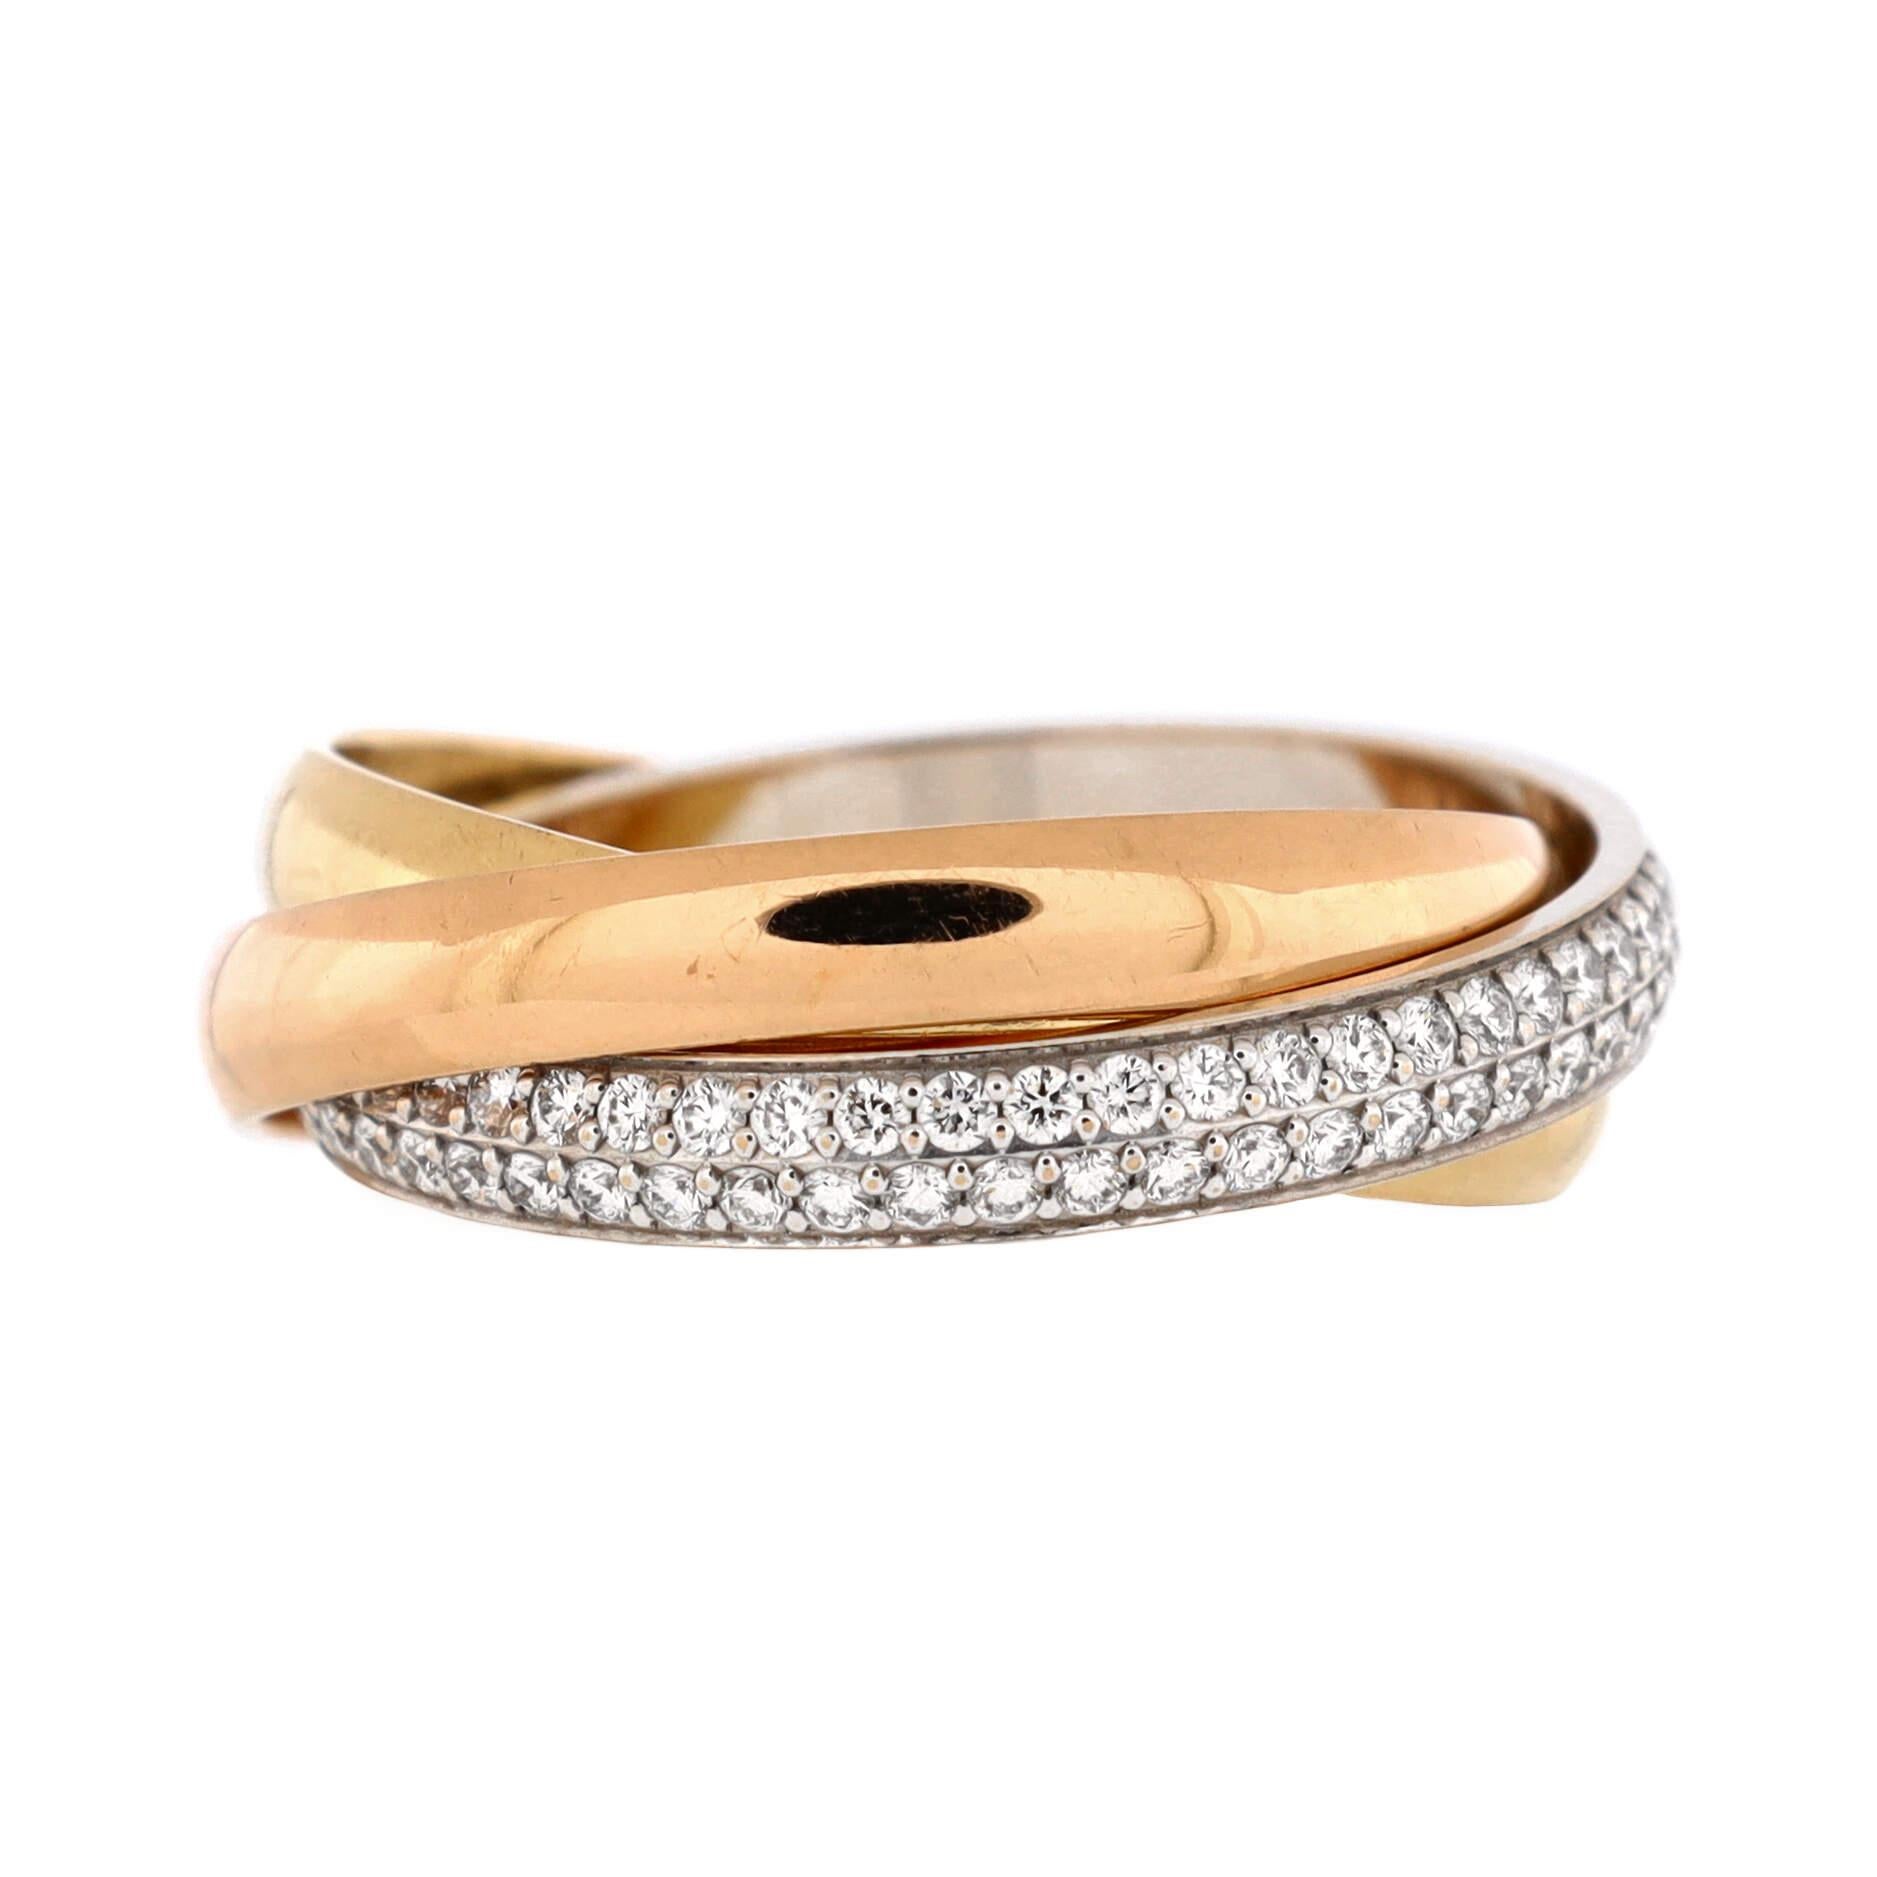 Condition: Excellent. Faint wear throughout.
Accessories: No Accessories
Measurements: Size: 6.25 - 53, Width: 2.80 mm
Designer: Cartier
Model: Trinity Ring 18K Tricolor Gold with Pave Diamonds Small
Exterior Color: Tricolor Gold
Item Number: